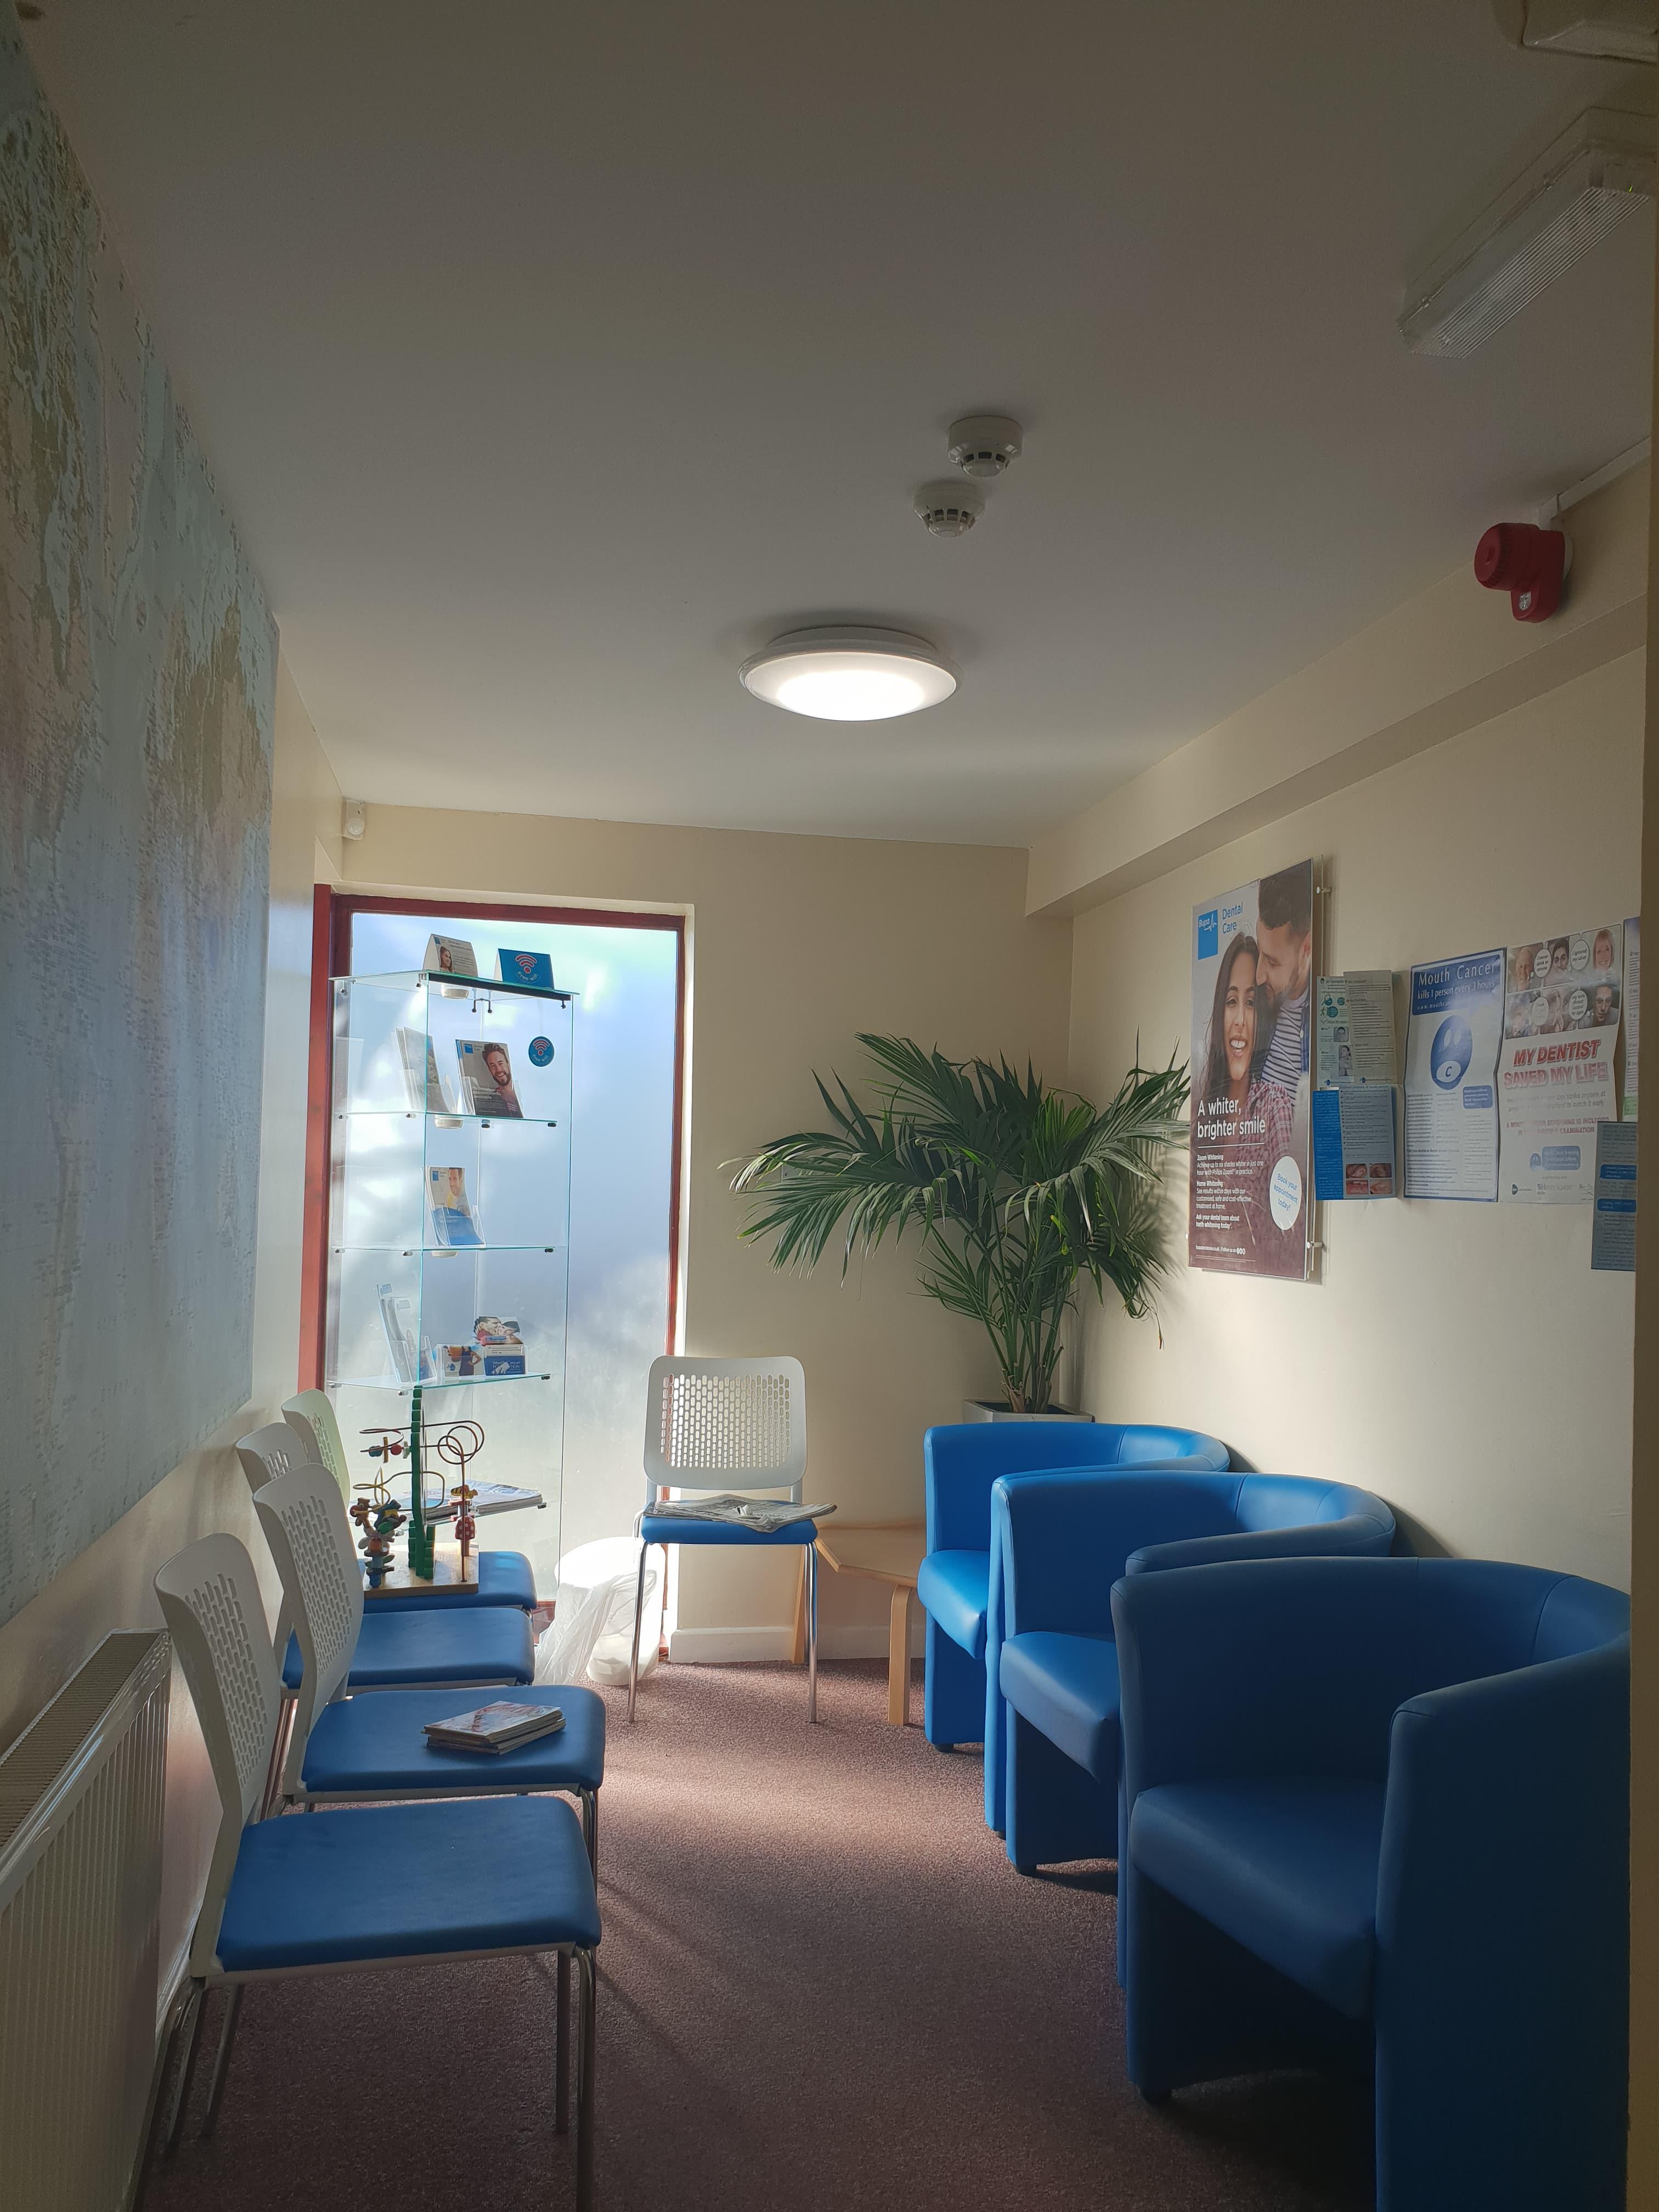 Images Bupa Dental Care Hollway Road